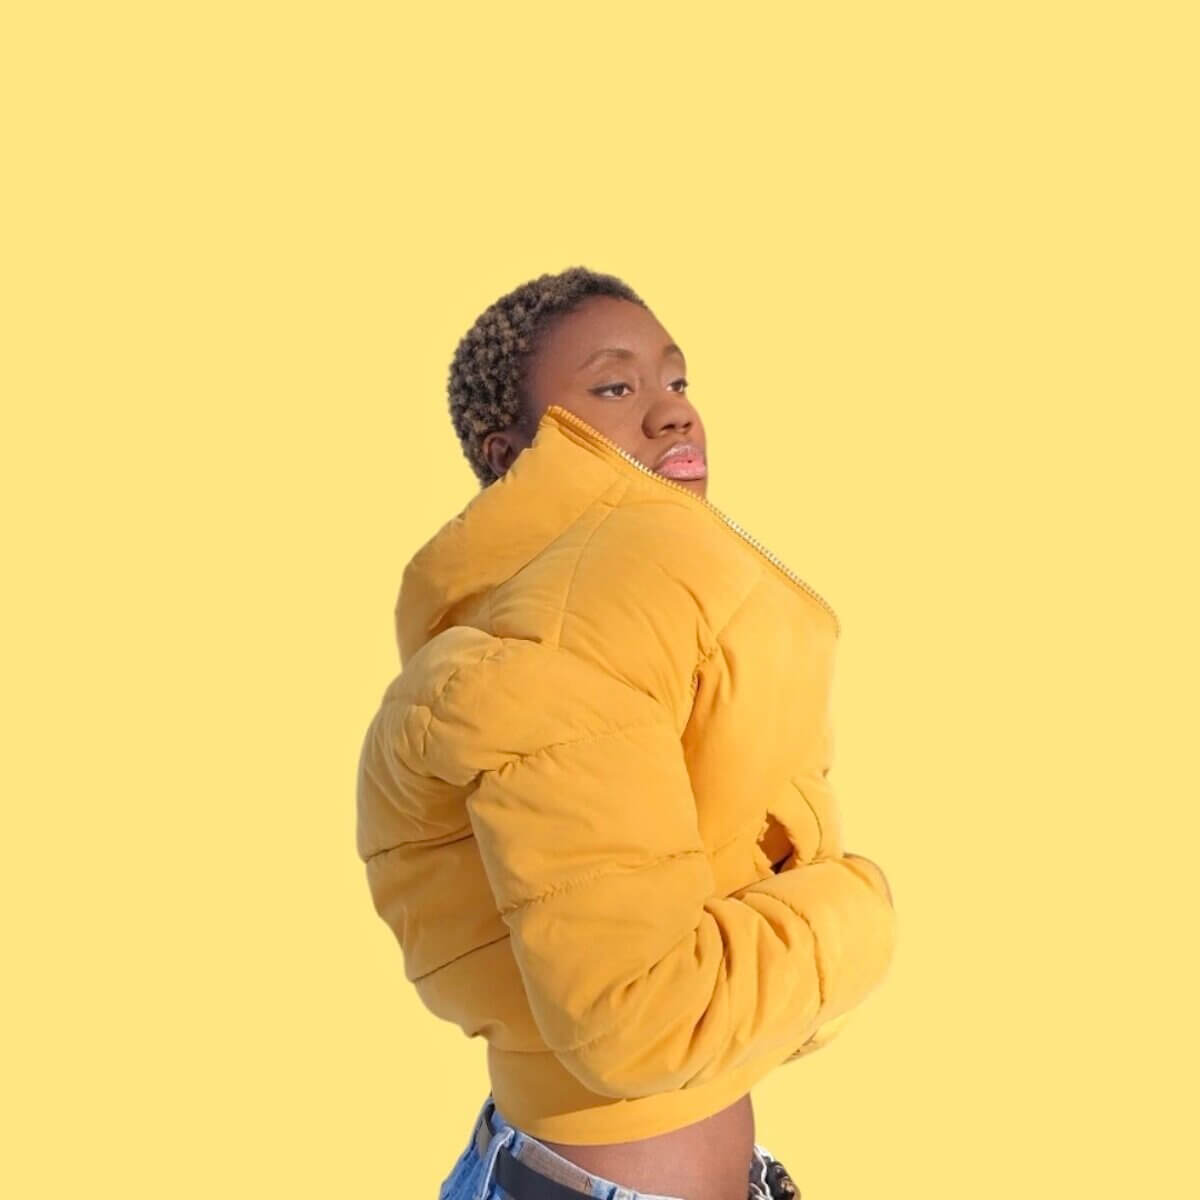 Emerald Osagie wearing a yellow bomber jacket with yellow background.